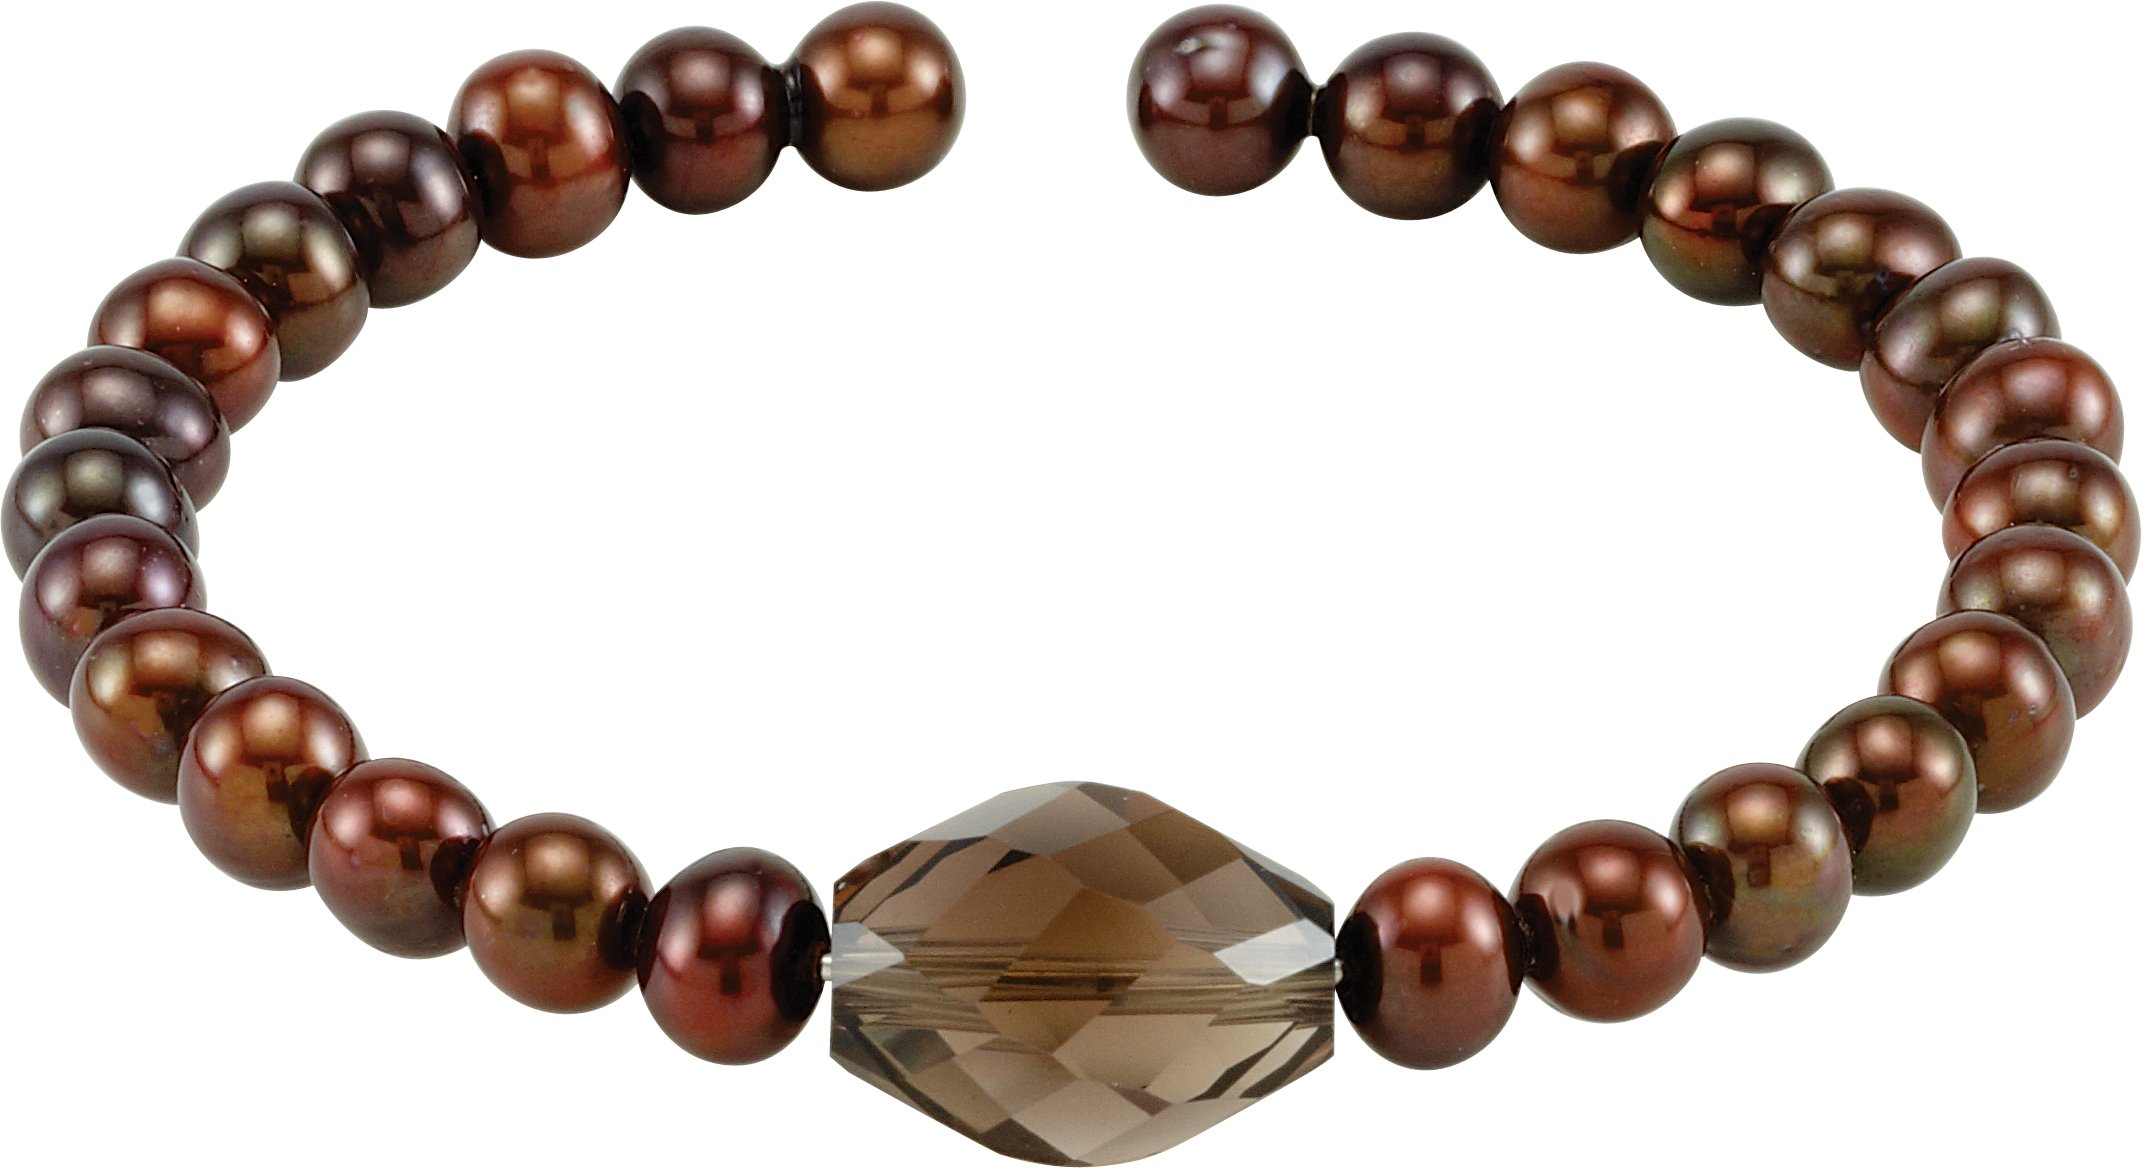 Copper Freshwater Cultured Pearl and Smoky Quartz Bracelet Ref. 3117662